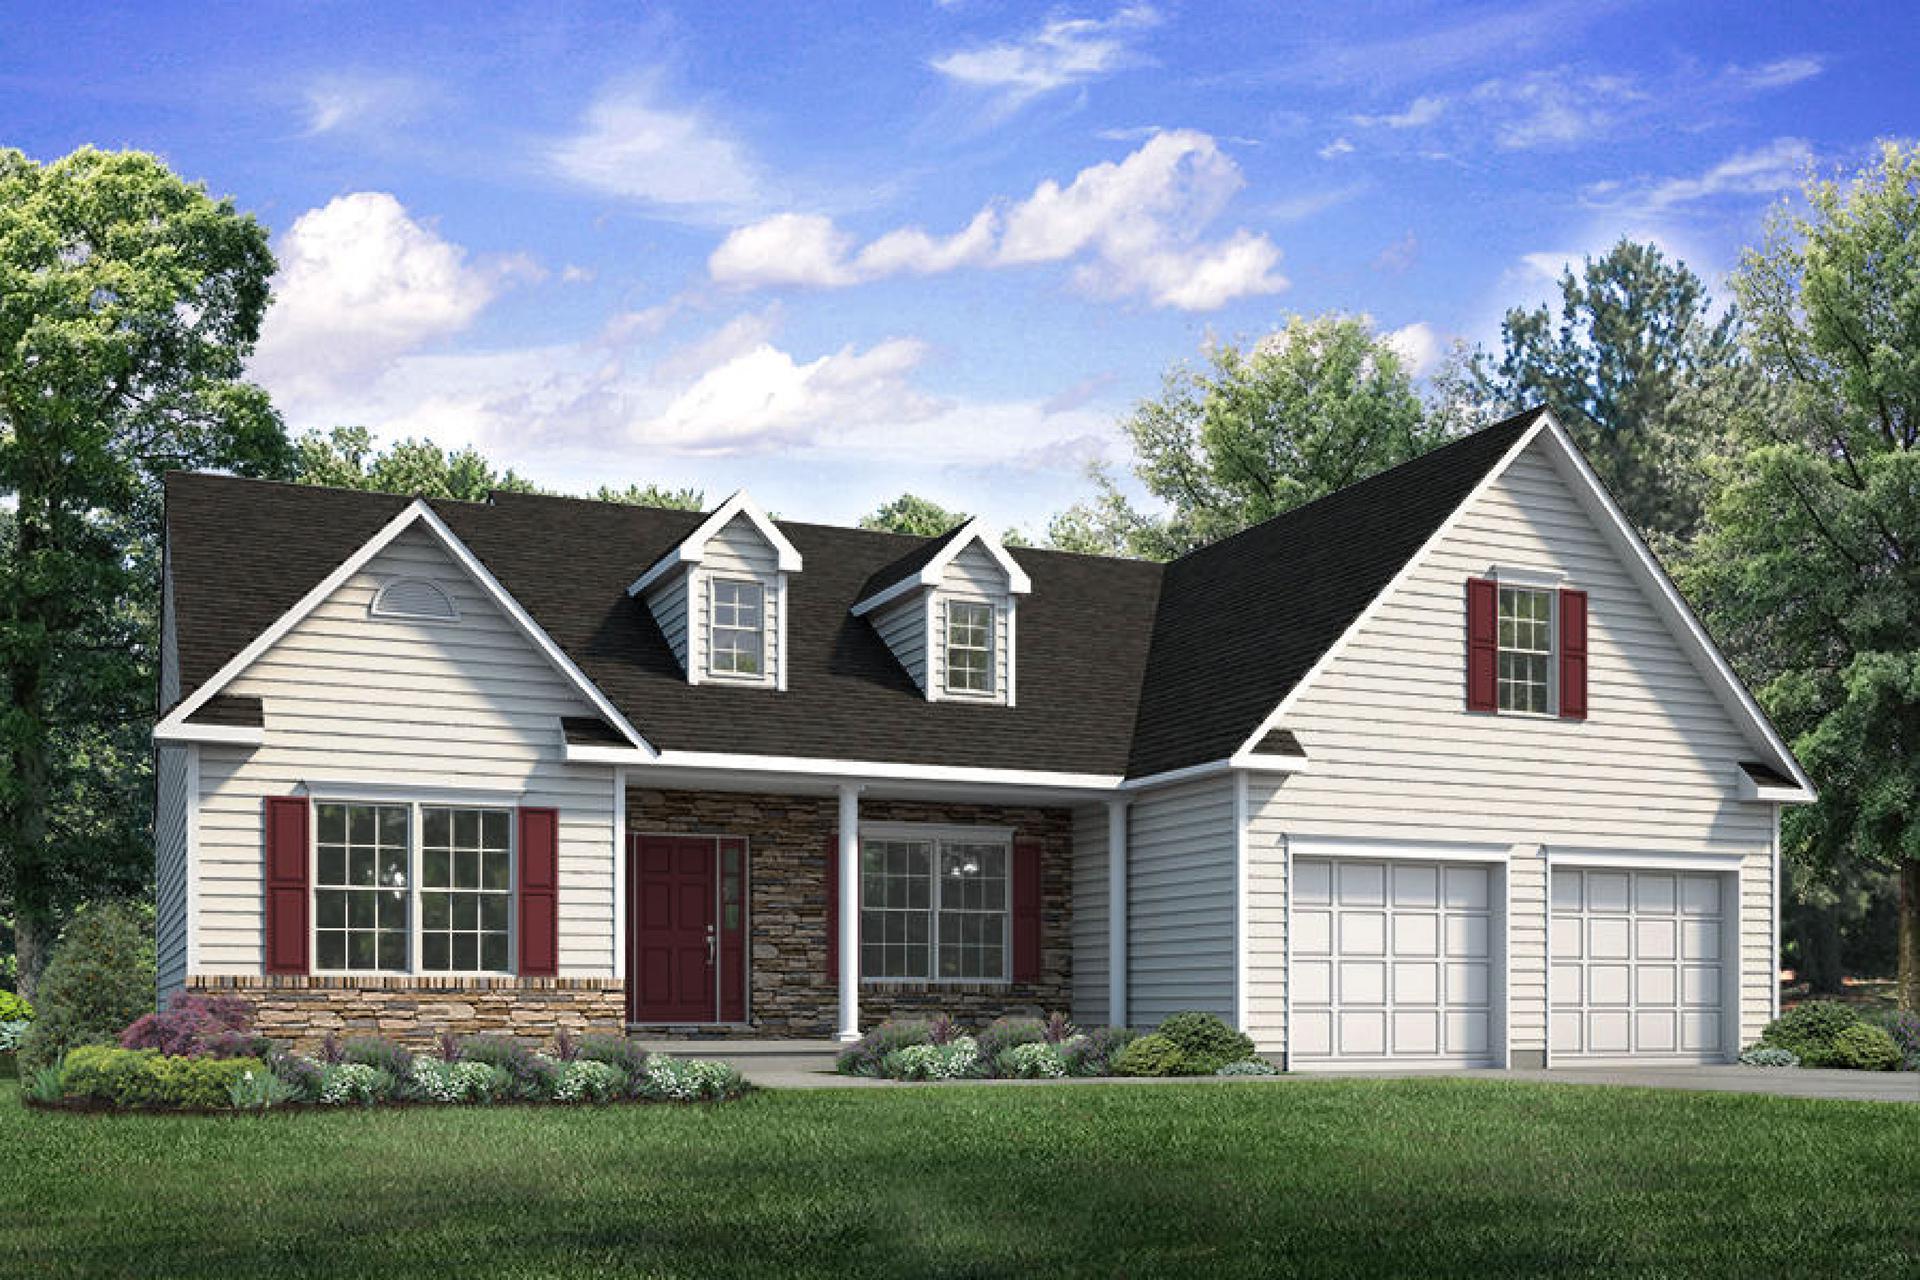 The St. Andrews New Home in Easton PA - Riverview Estates